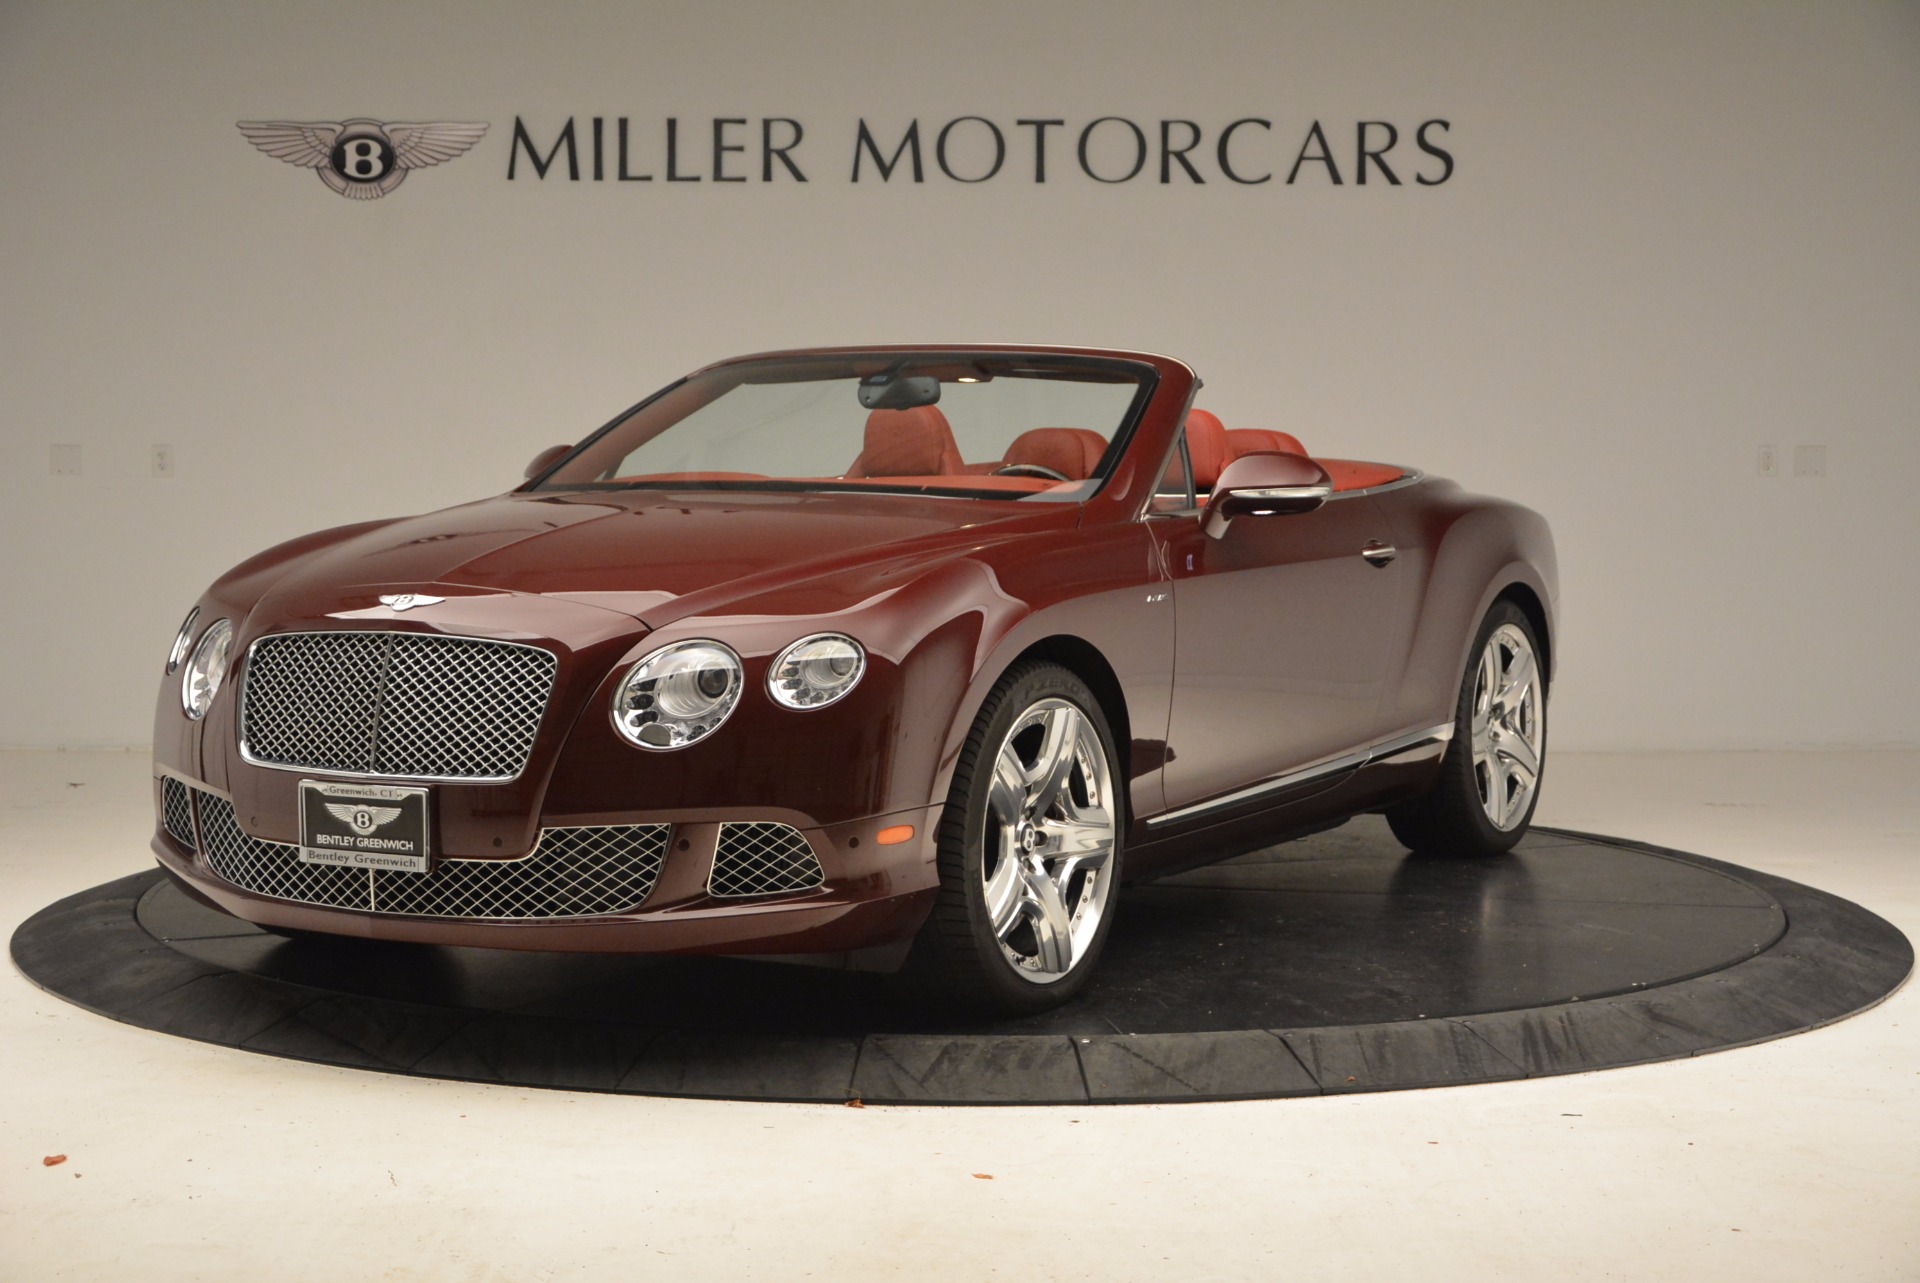 Used 2014 Bentley Continental GT W12 for sale Sold at Rolls-Royce Motor Cars Greenwich in Greenwich CT 06830 1